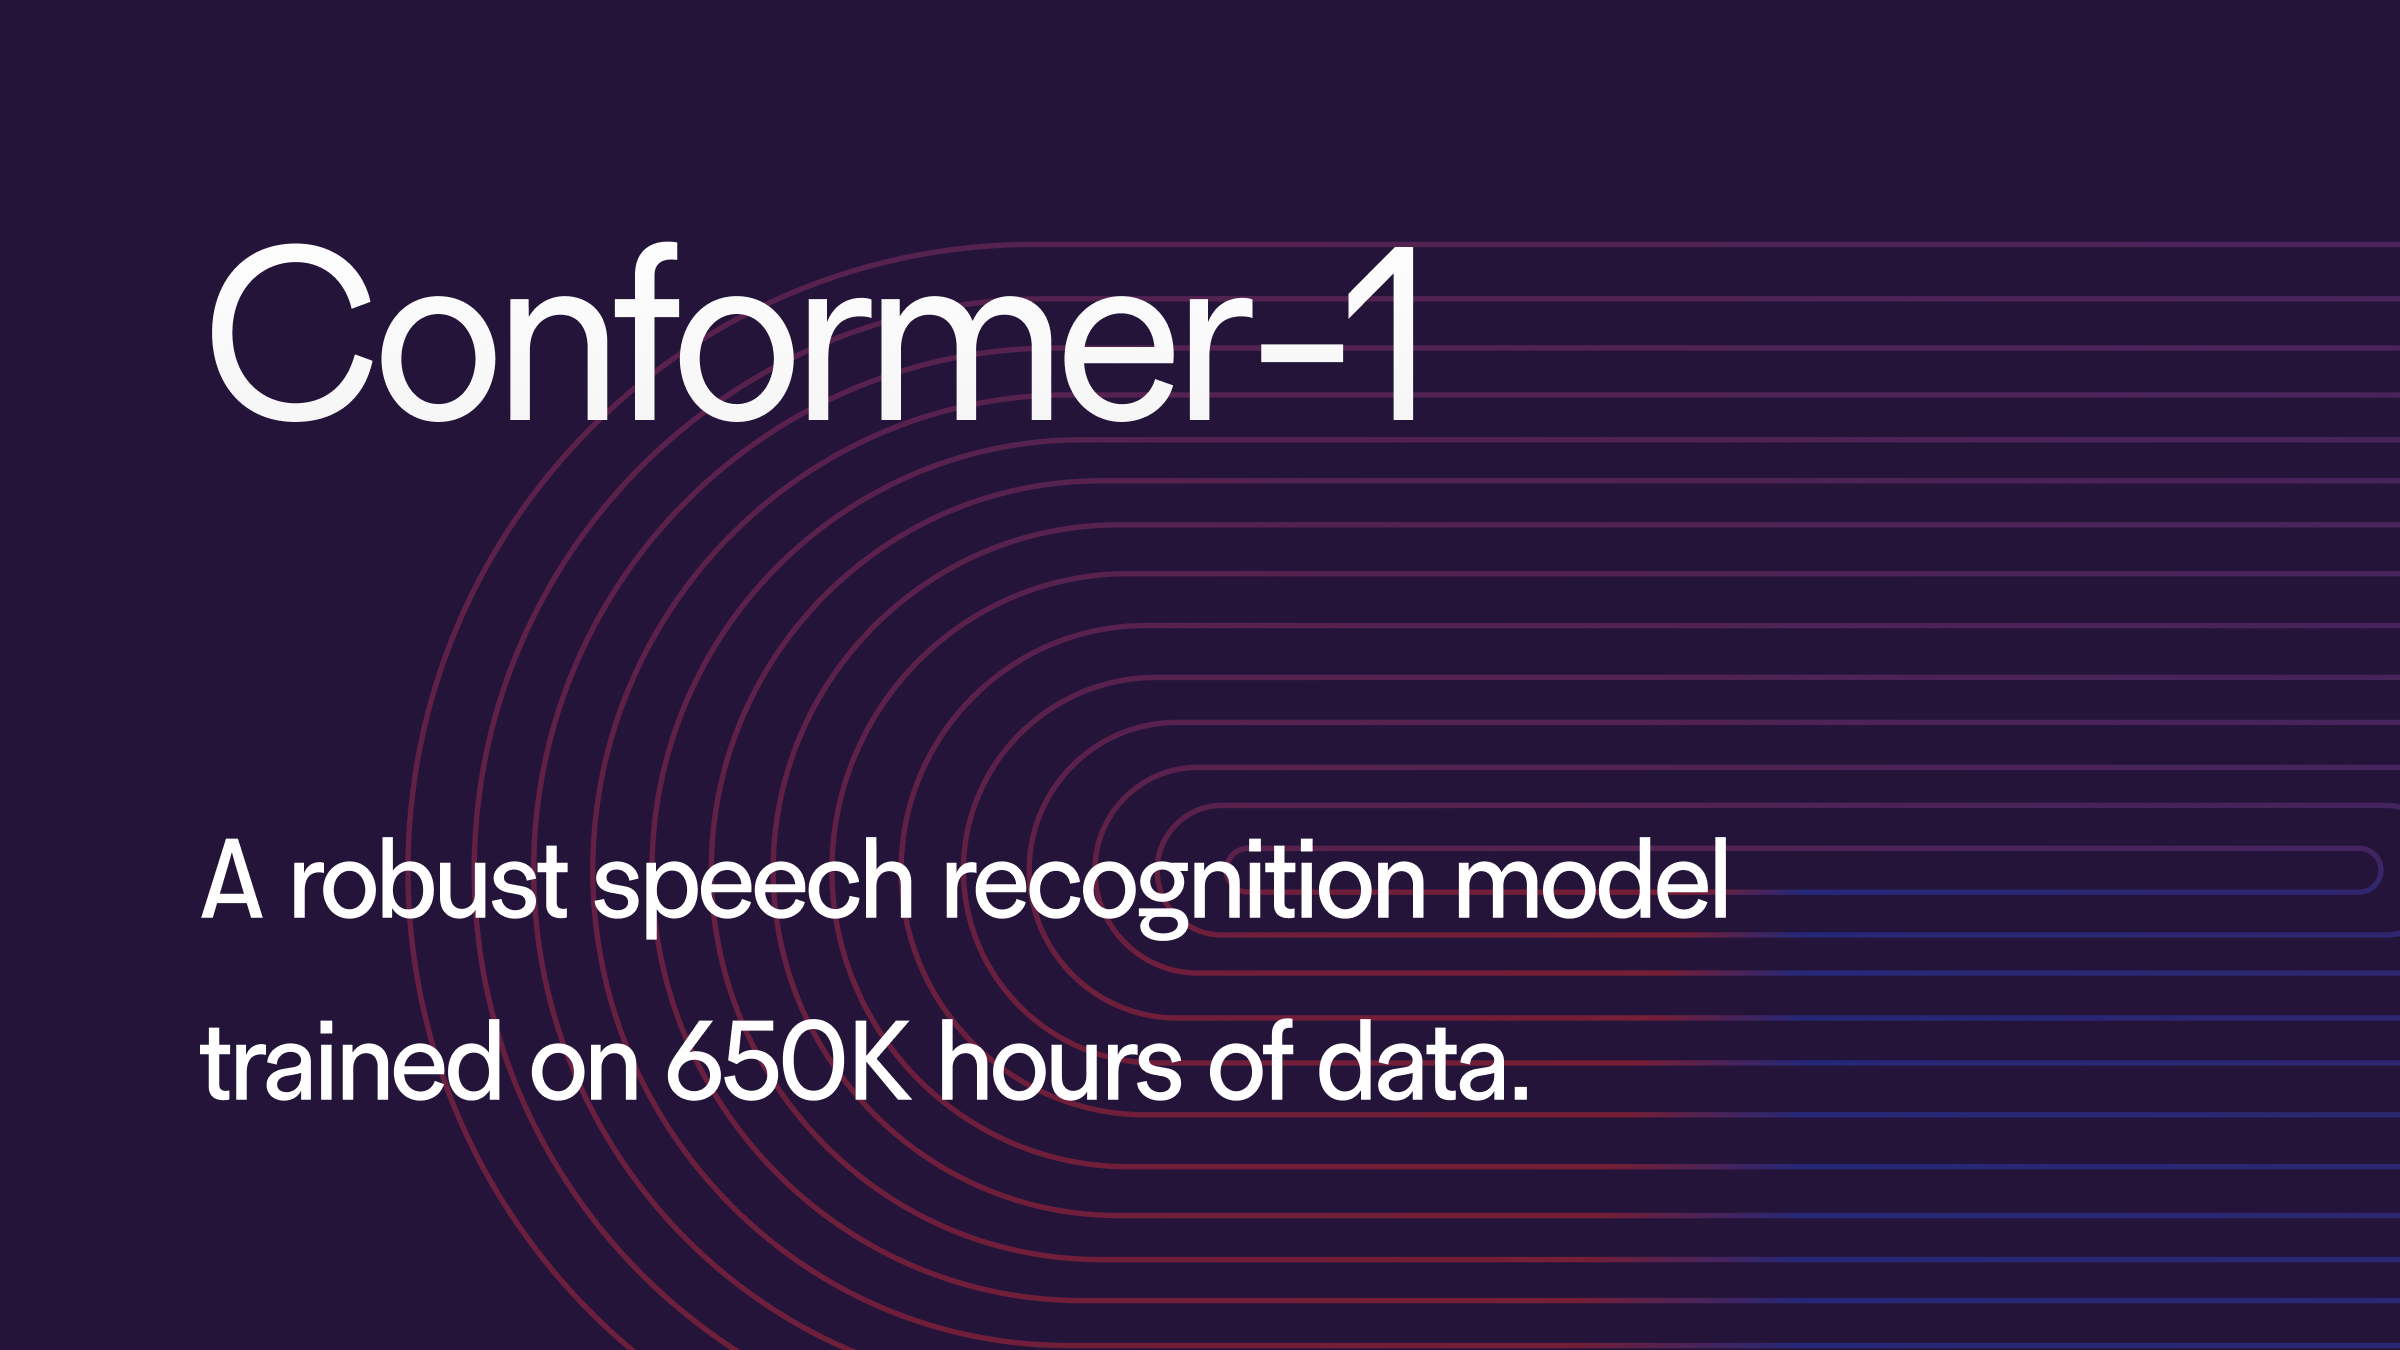 The Conformer [1] is a neural net for speech recognition that was published by Google Brain in 2020. The Conformer builds upon the now-ubiquitous Tran